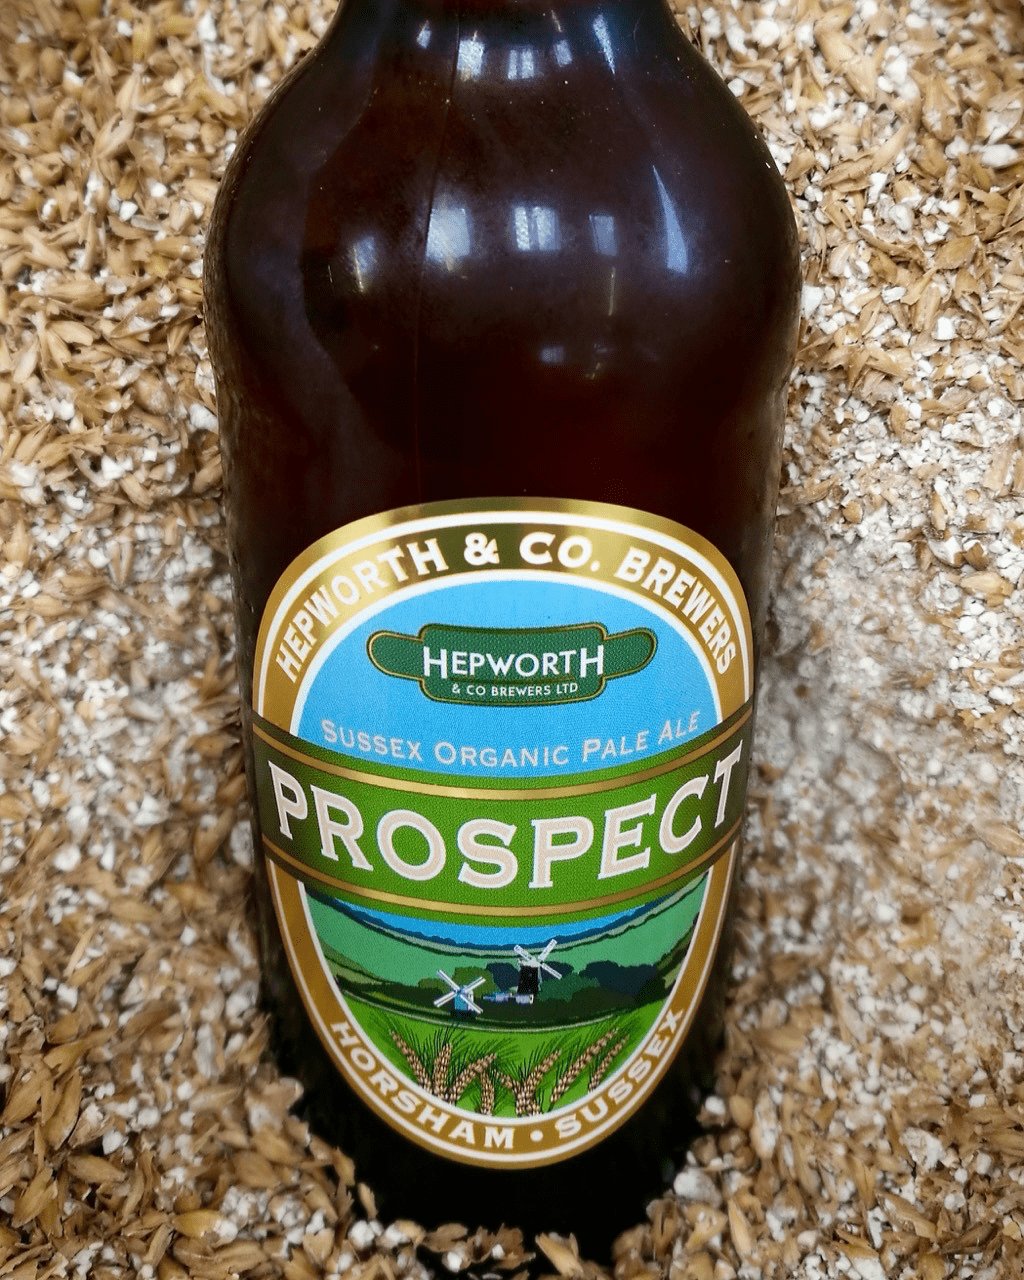 Picture of Prospect from Hepworth Brewery in Sussex for the Beer Yeti review.